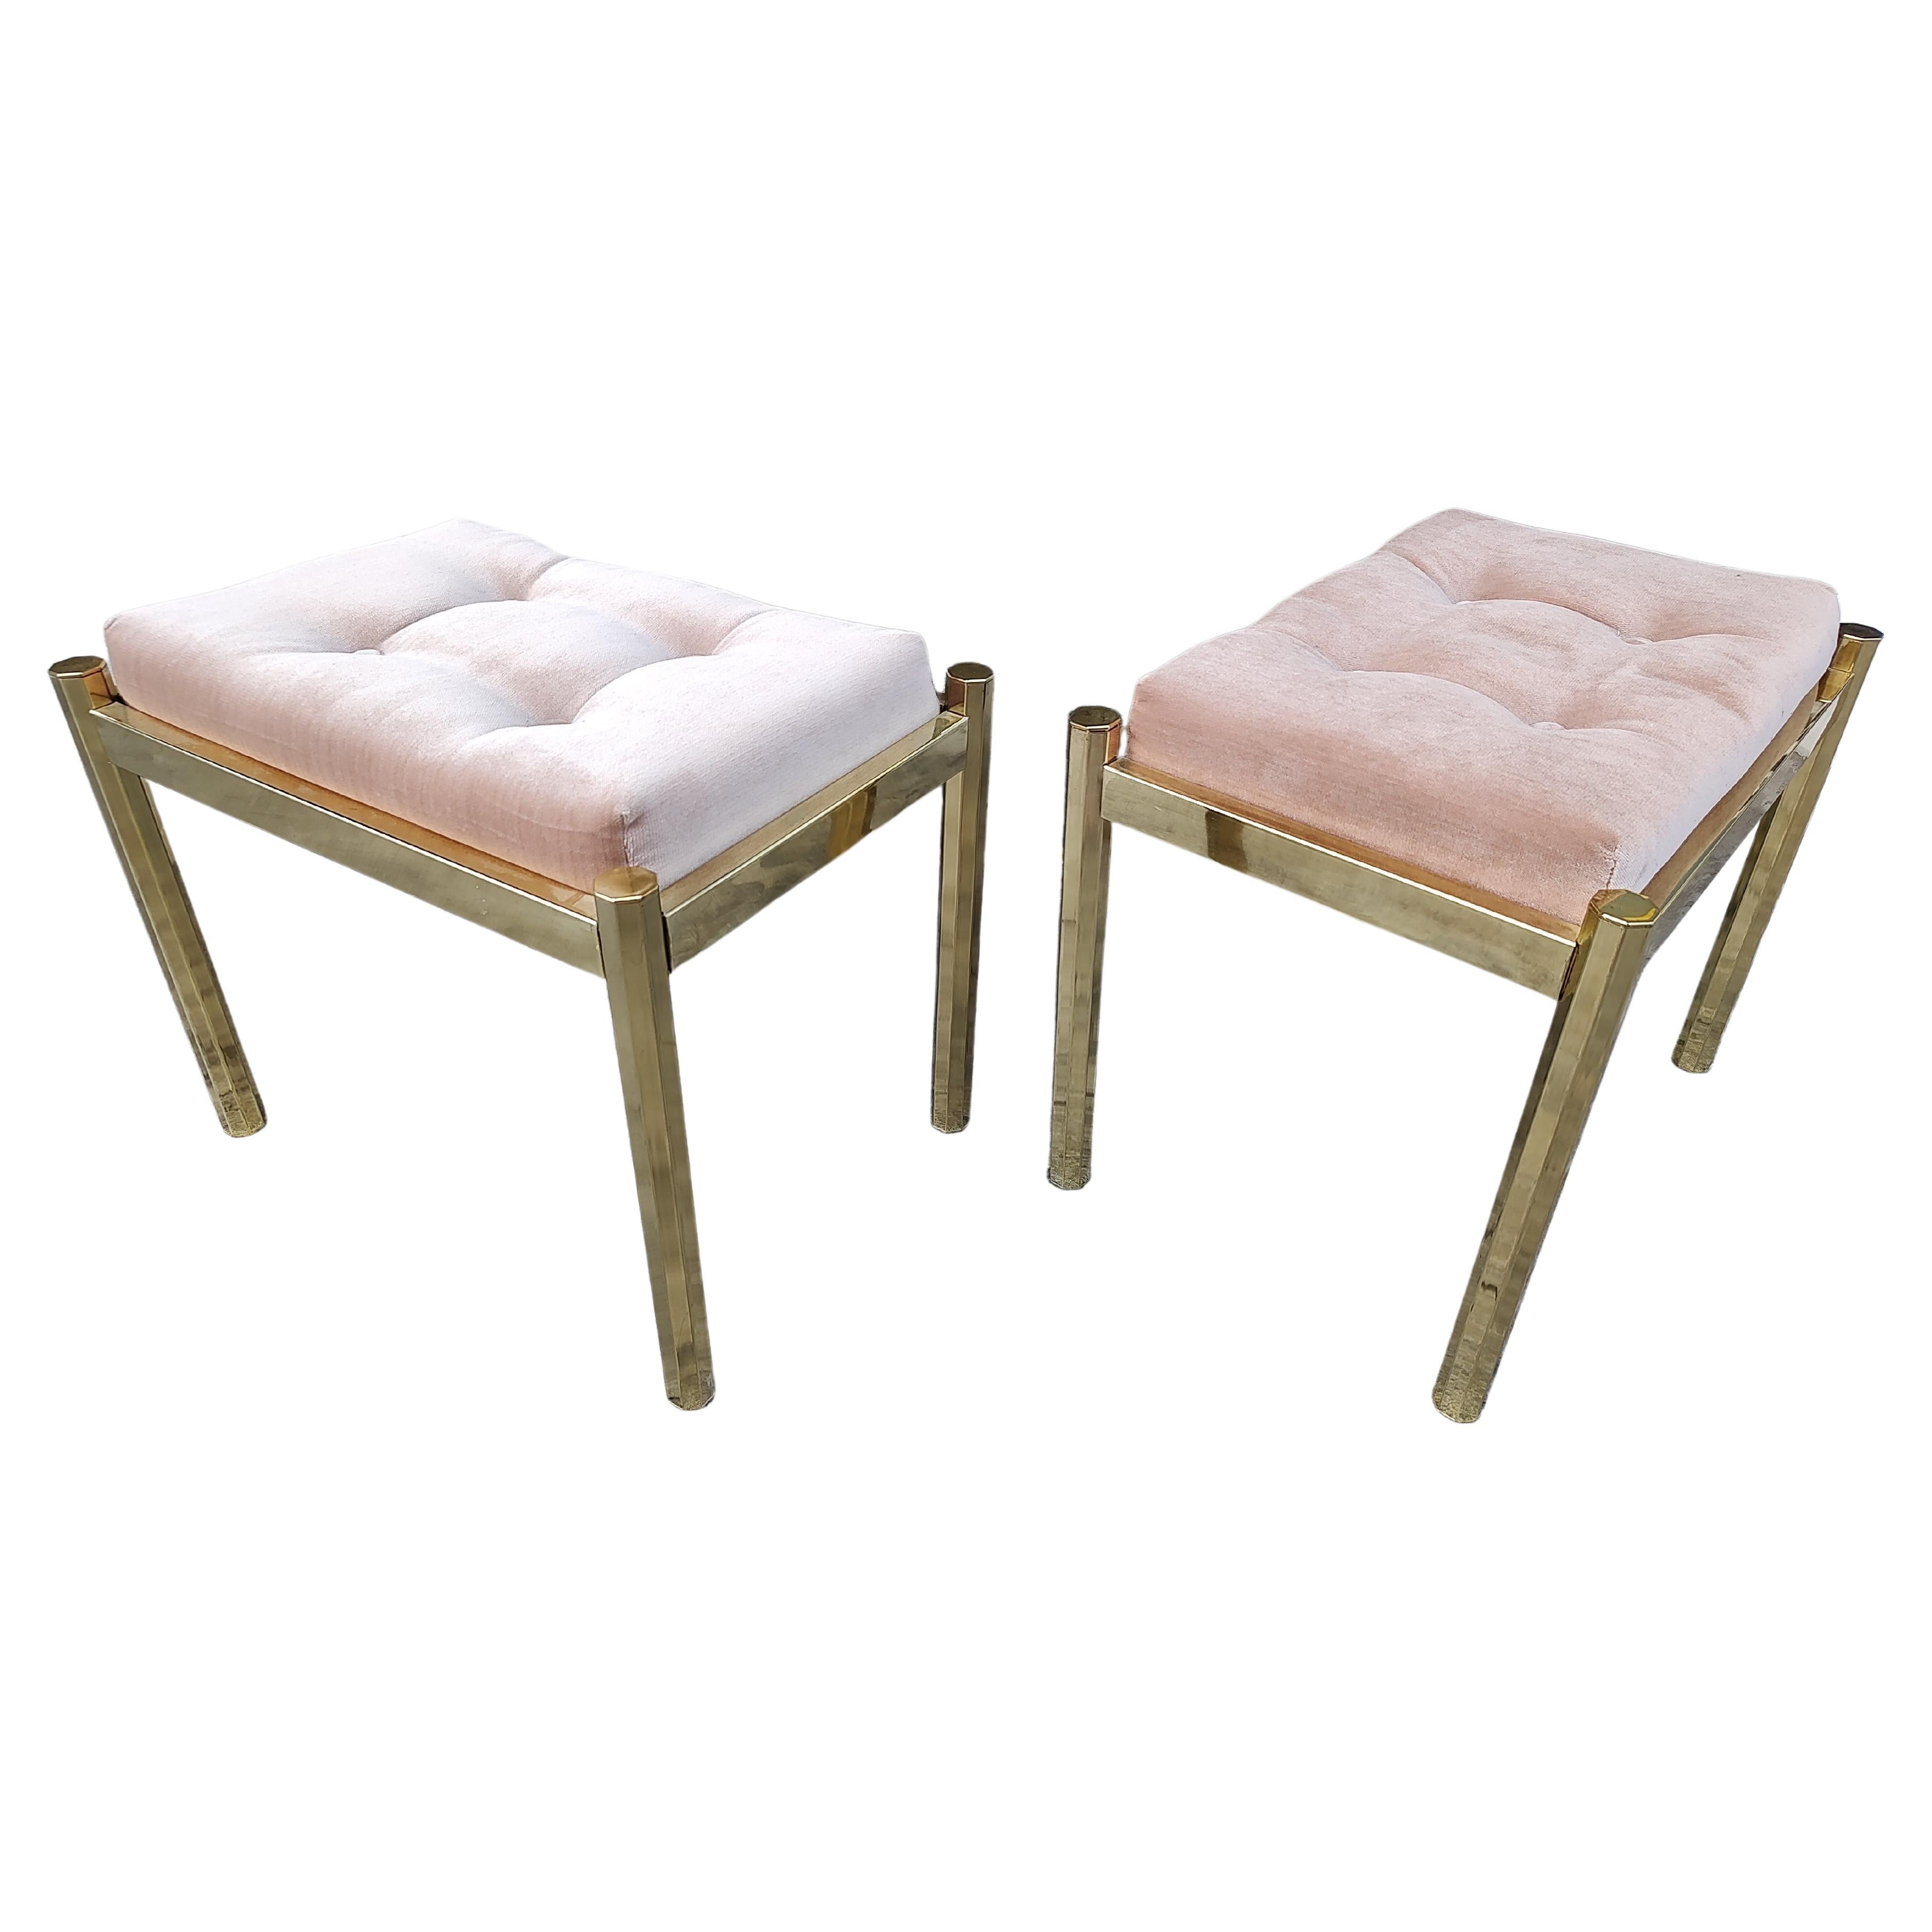 Pair of Mid-Century Modern Hollywood Regency Brass with Tufted Cushions Benches